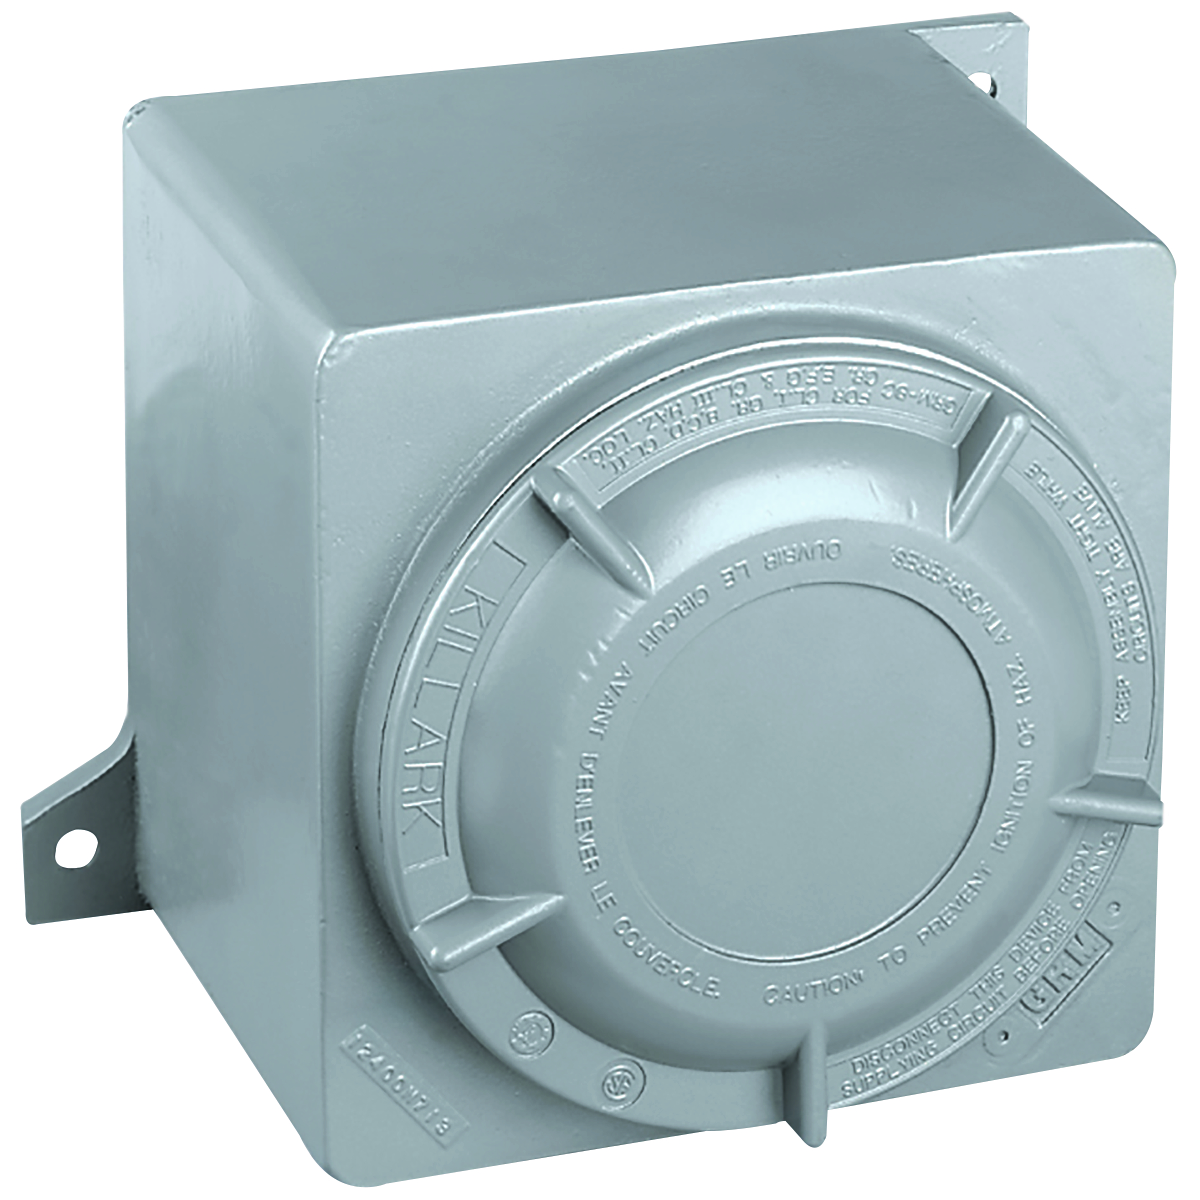 GR SERIES - THREADED BOX WITH BLANK COVER - COVER OPENING DIAMETER 9-5/8IN - VIEWING AREA 7-3/4 IN - MAXIMUM CONDUIT SIZE 4 IN